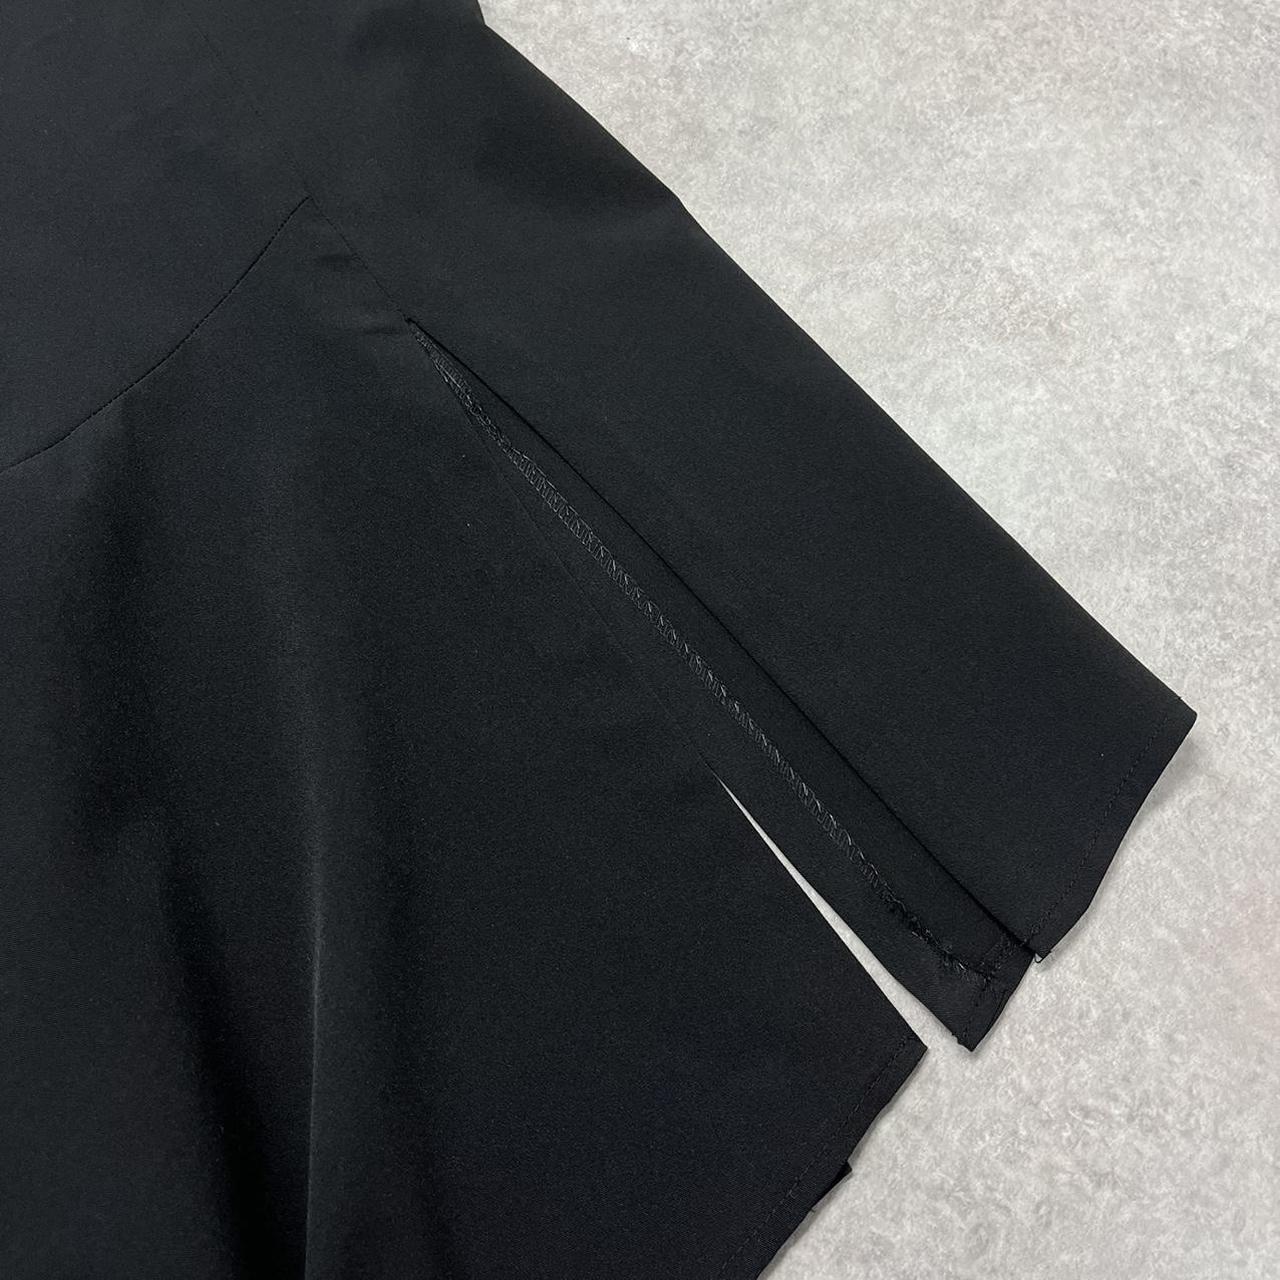 black asymmetric skirt with slit recommend for 8/10,... - Depop